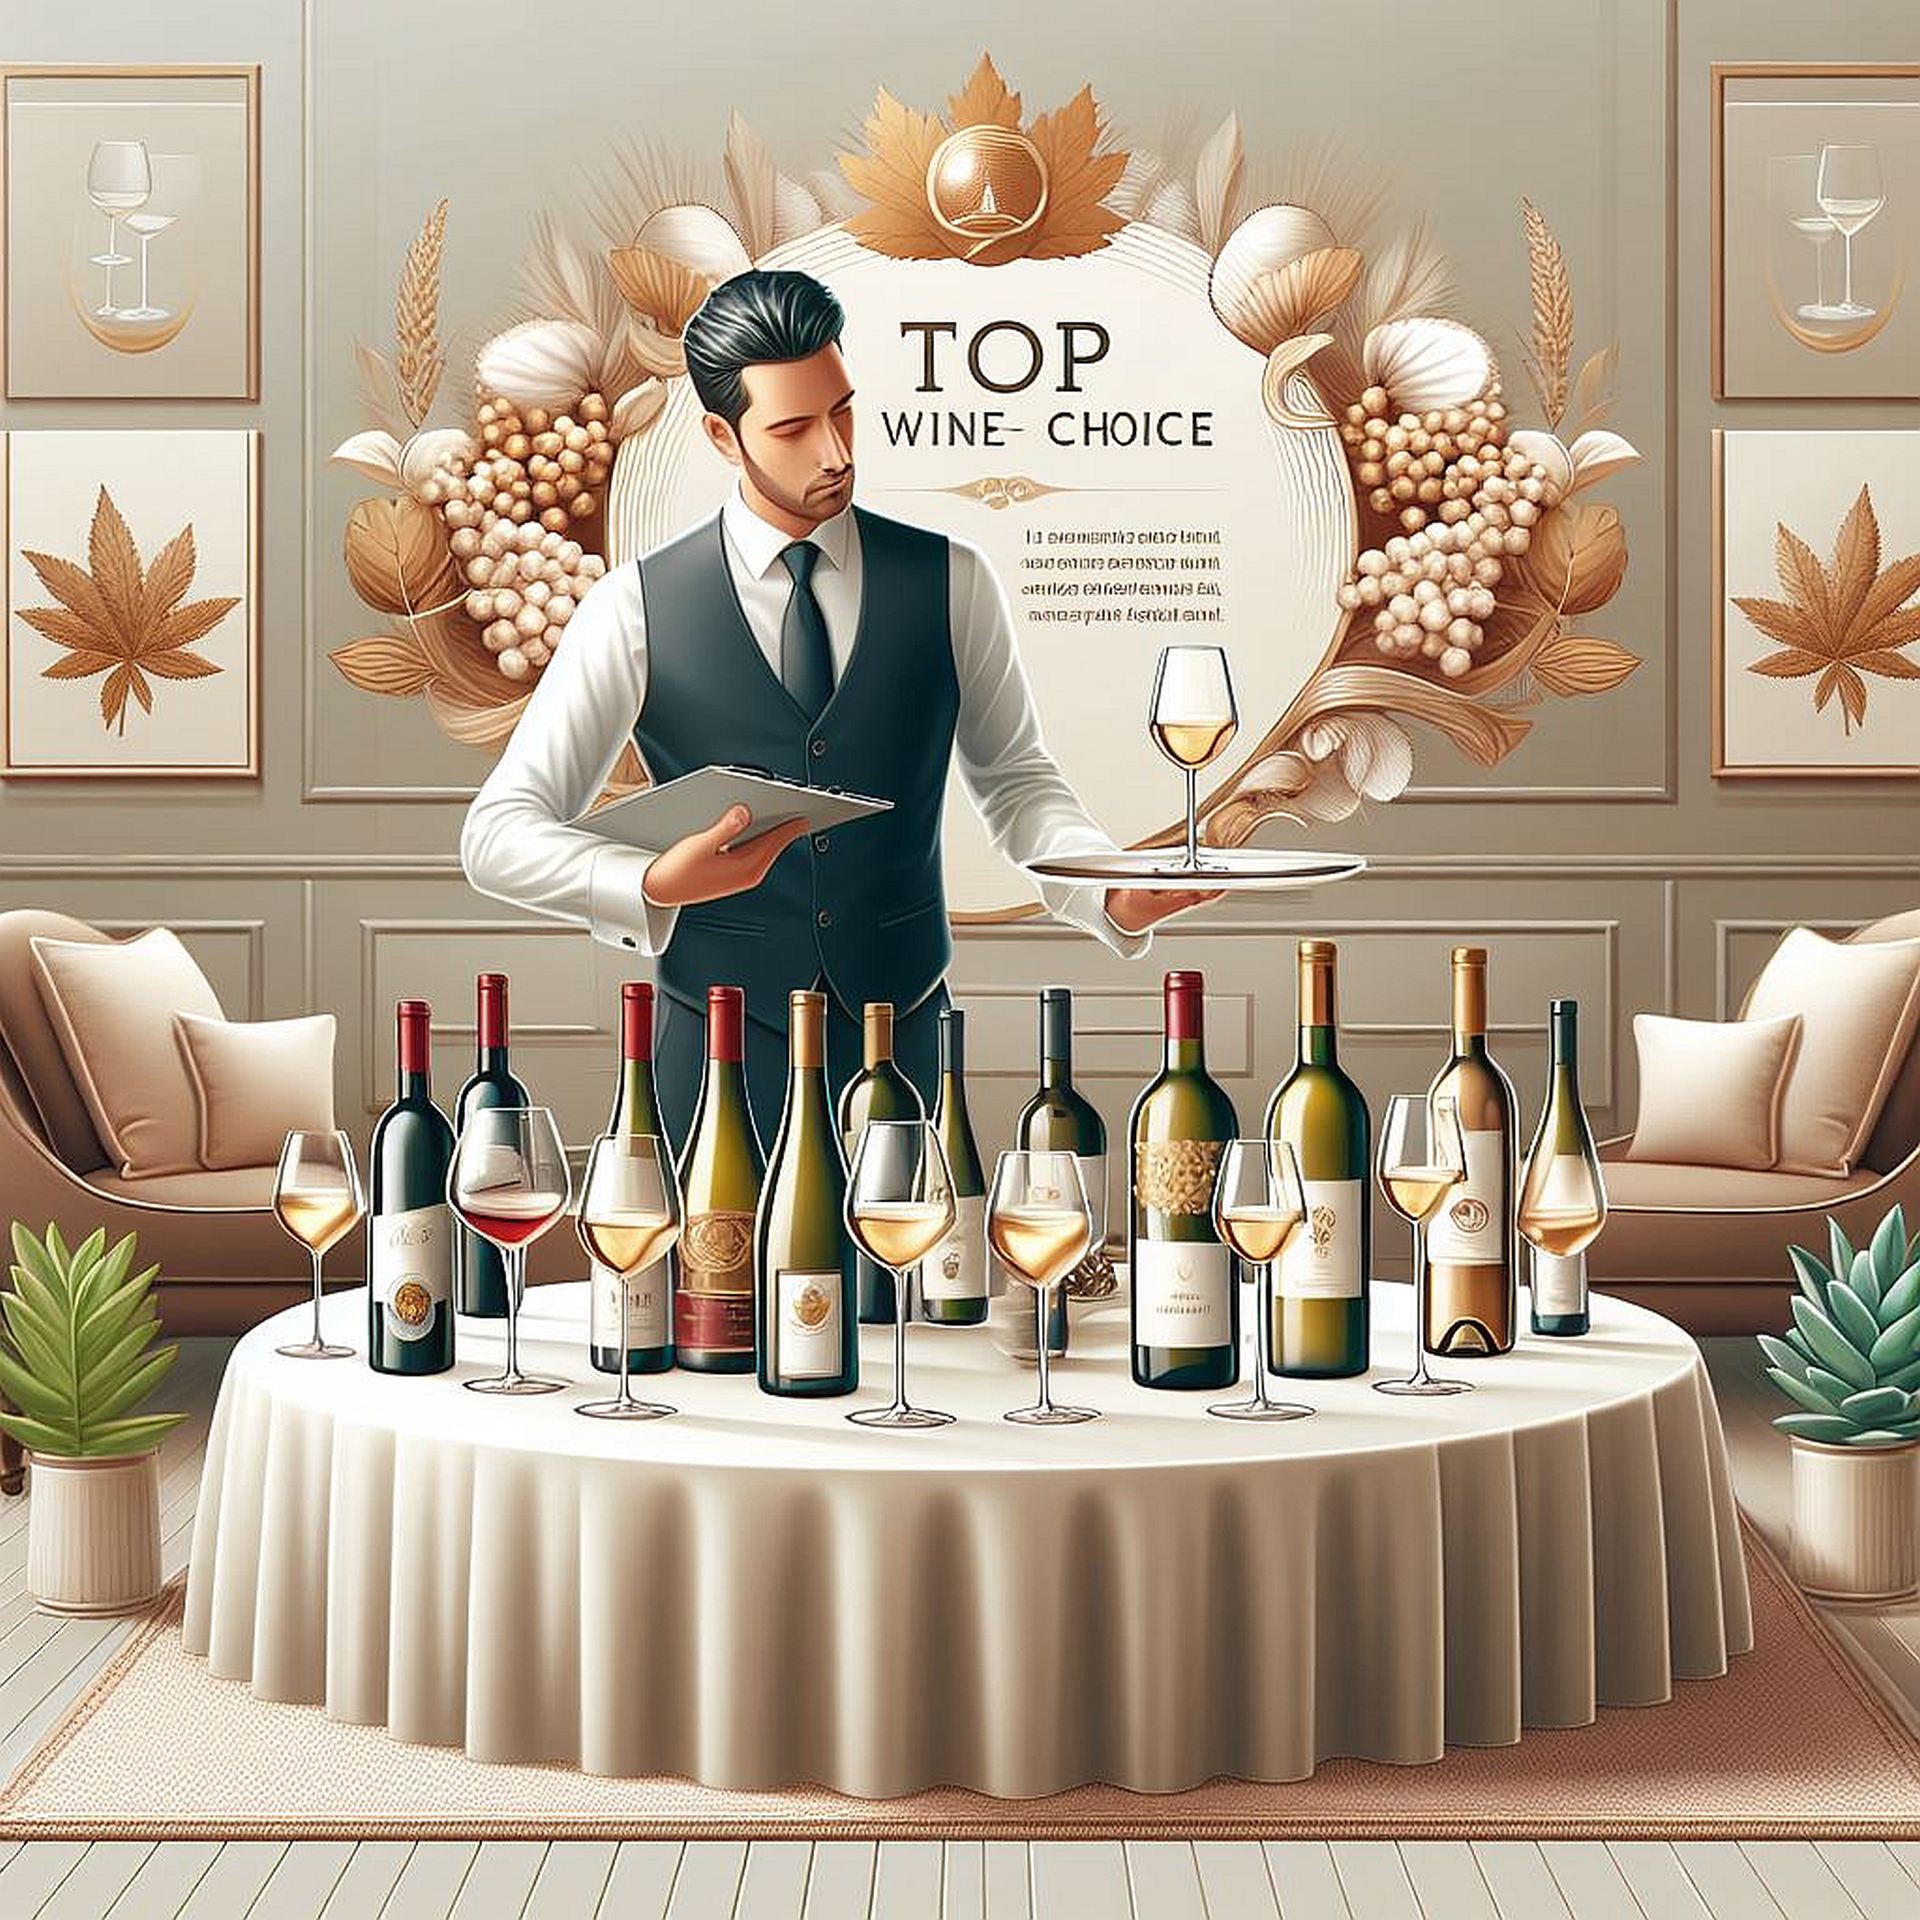 A luxurious wine tasting setting with an array of the best Italian white wines elegantly displayed on a table, accompanied by a sommelier presenting a bottle. This illustrates the section discussing top wine choices.